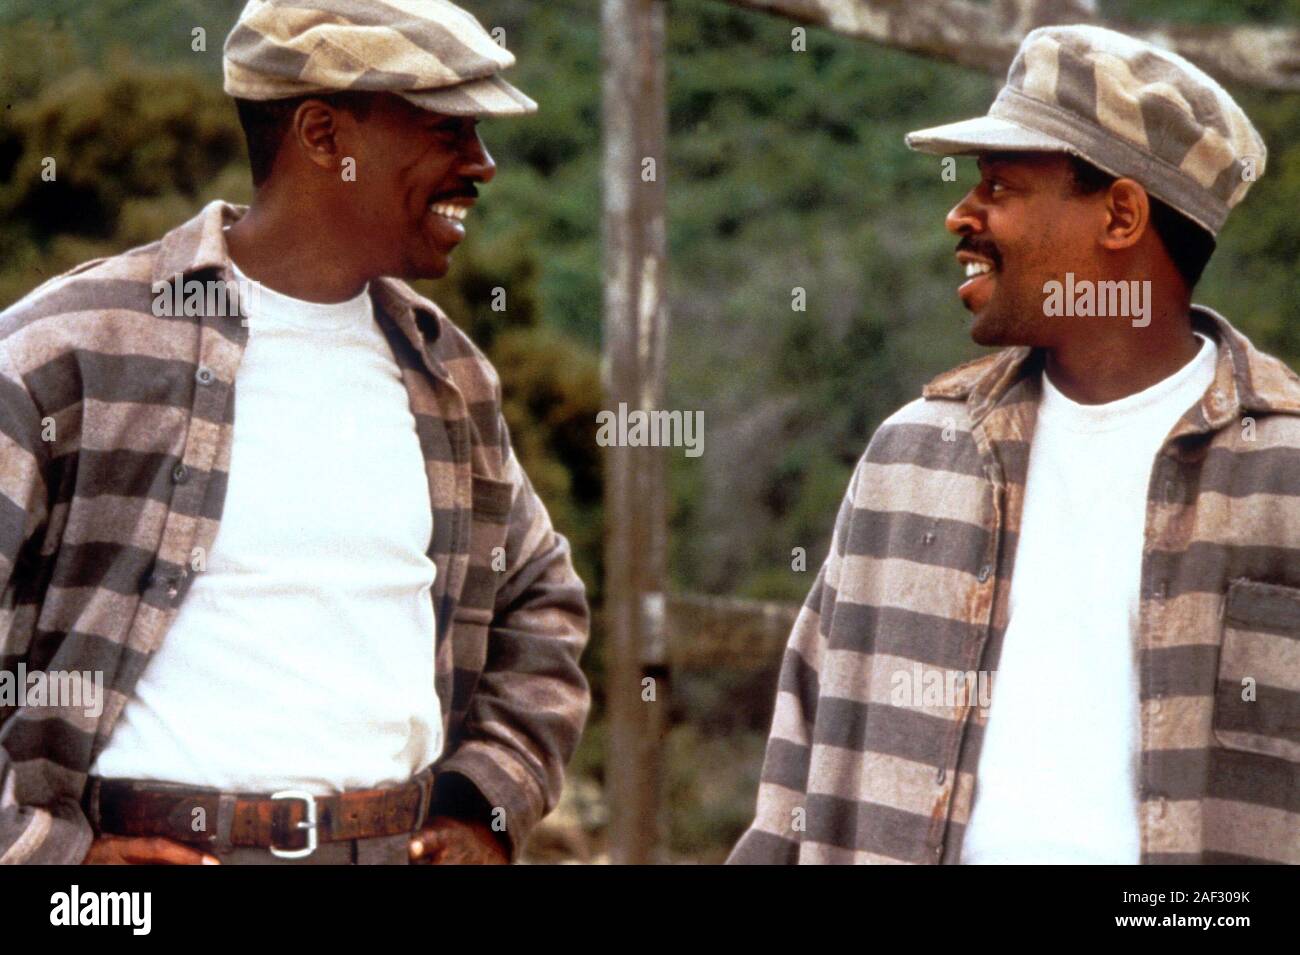 EDDIE MURPHY and MARTIN LAWRENCE in LIFE (1999), directed by TED DEMME. Credit: UNIVERSAL PICTURES / Album Stock Photo